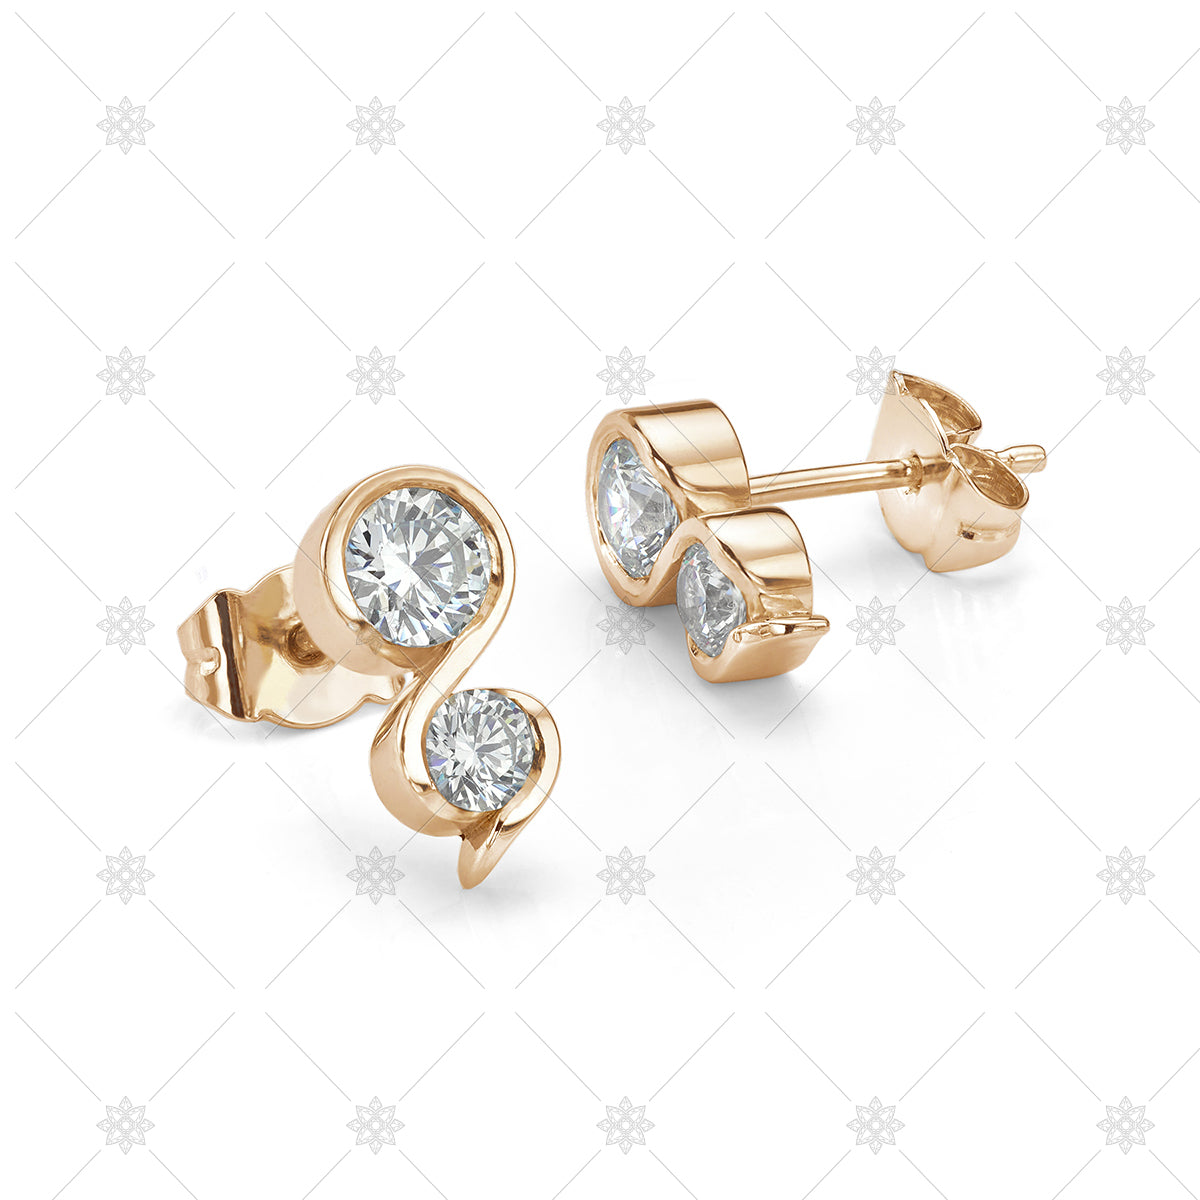 Rose gold diamond earrings image for download